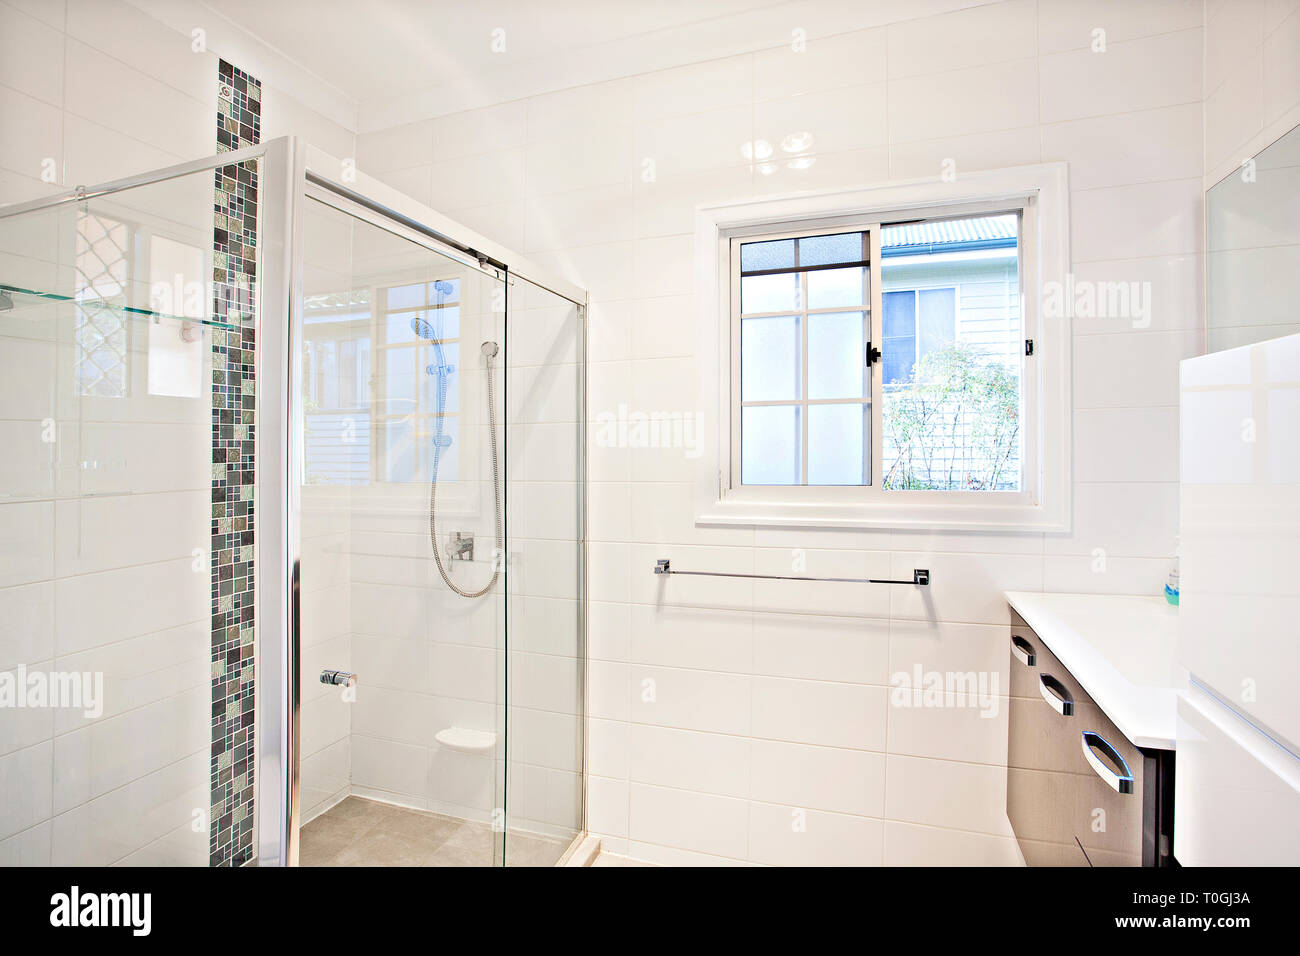 Modern White Bathroom Interior With Glass Shower Cubicle And